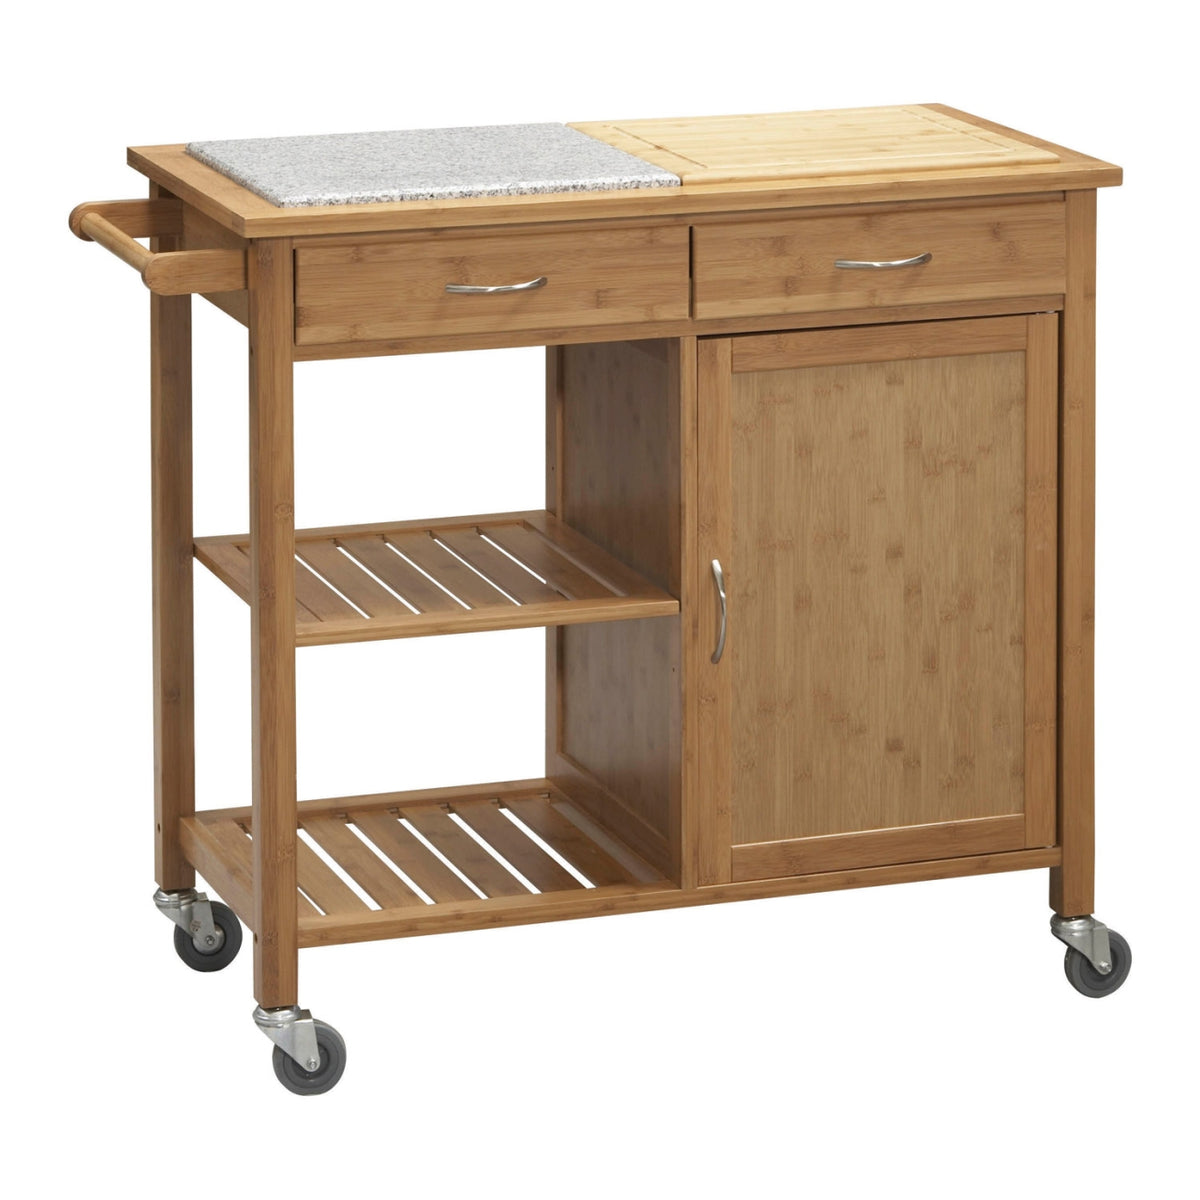 buy kitchen storage carts at cheap rate in bulk. wholesale & retail storage & organizers items store.